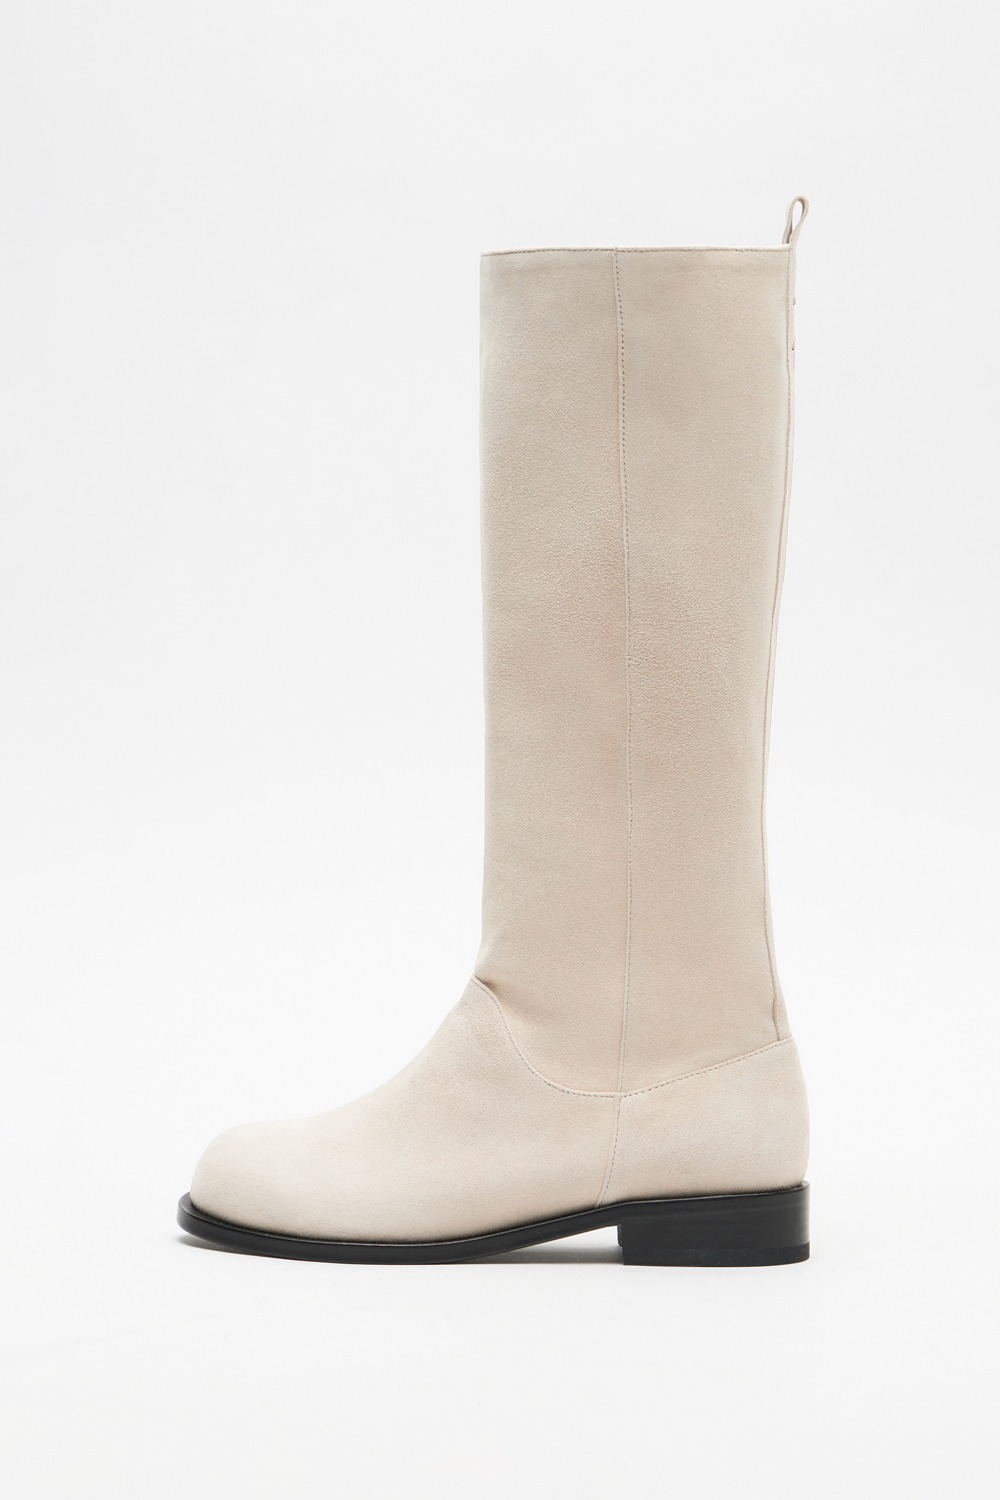 Knee-High Suede Boots (Women) - Ivory